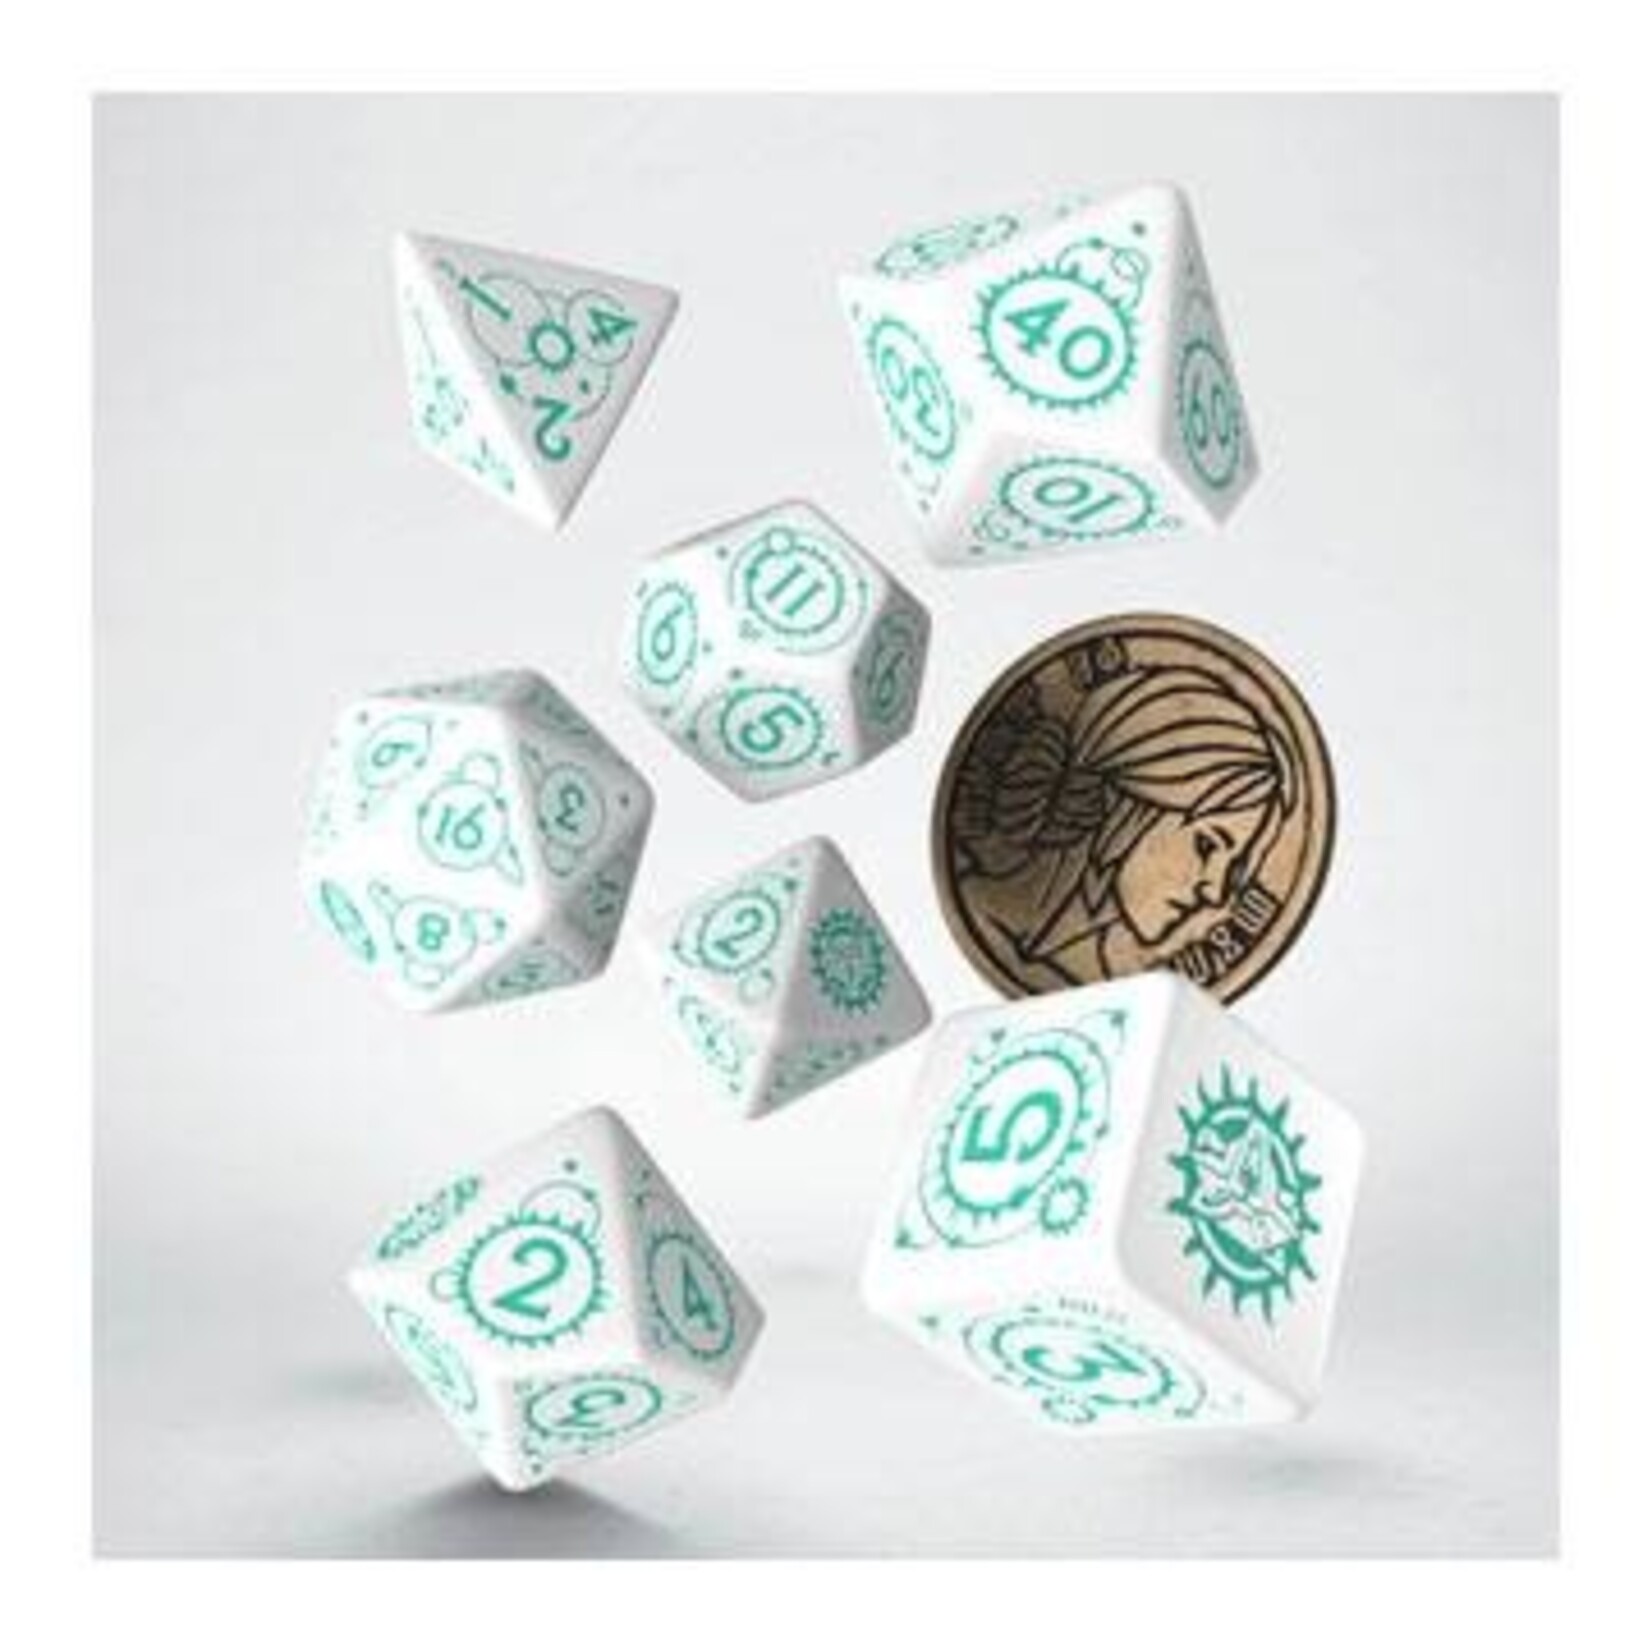 Q Workshop The Witcher Dice Set Ciri The Law of Surprise